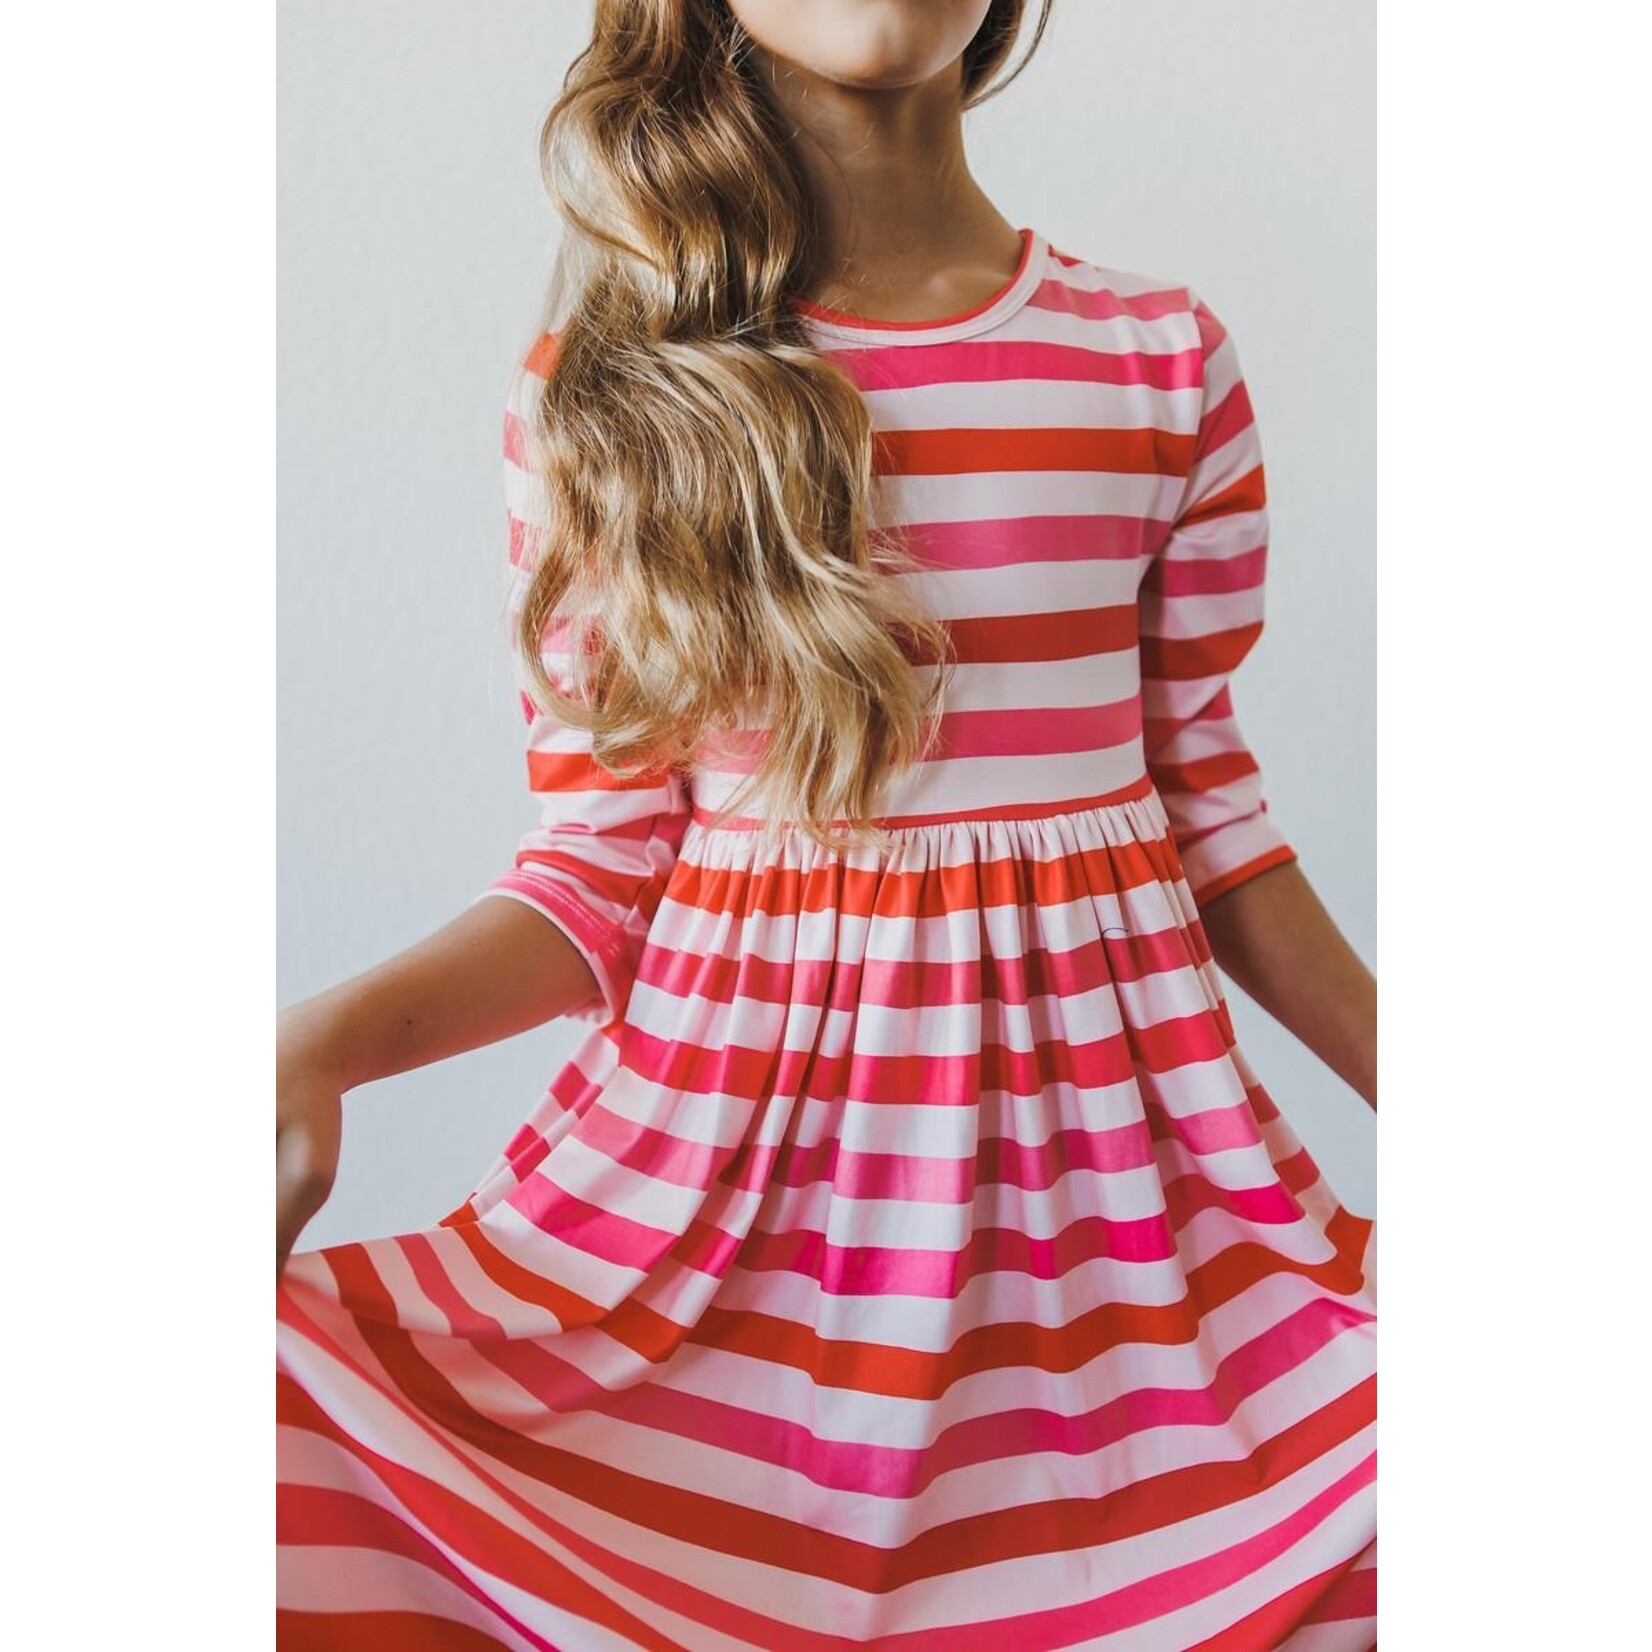 Mila & Rose Mila & Rose All You Need is Love Twirl Dress